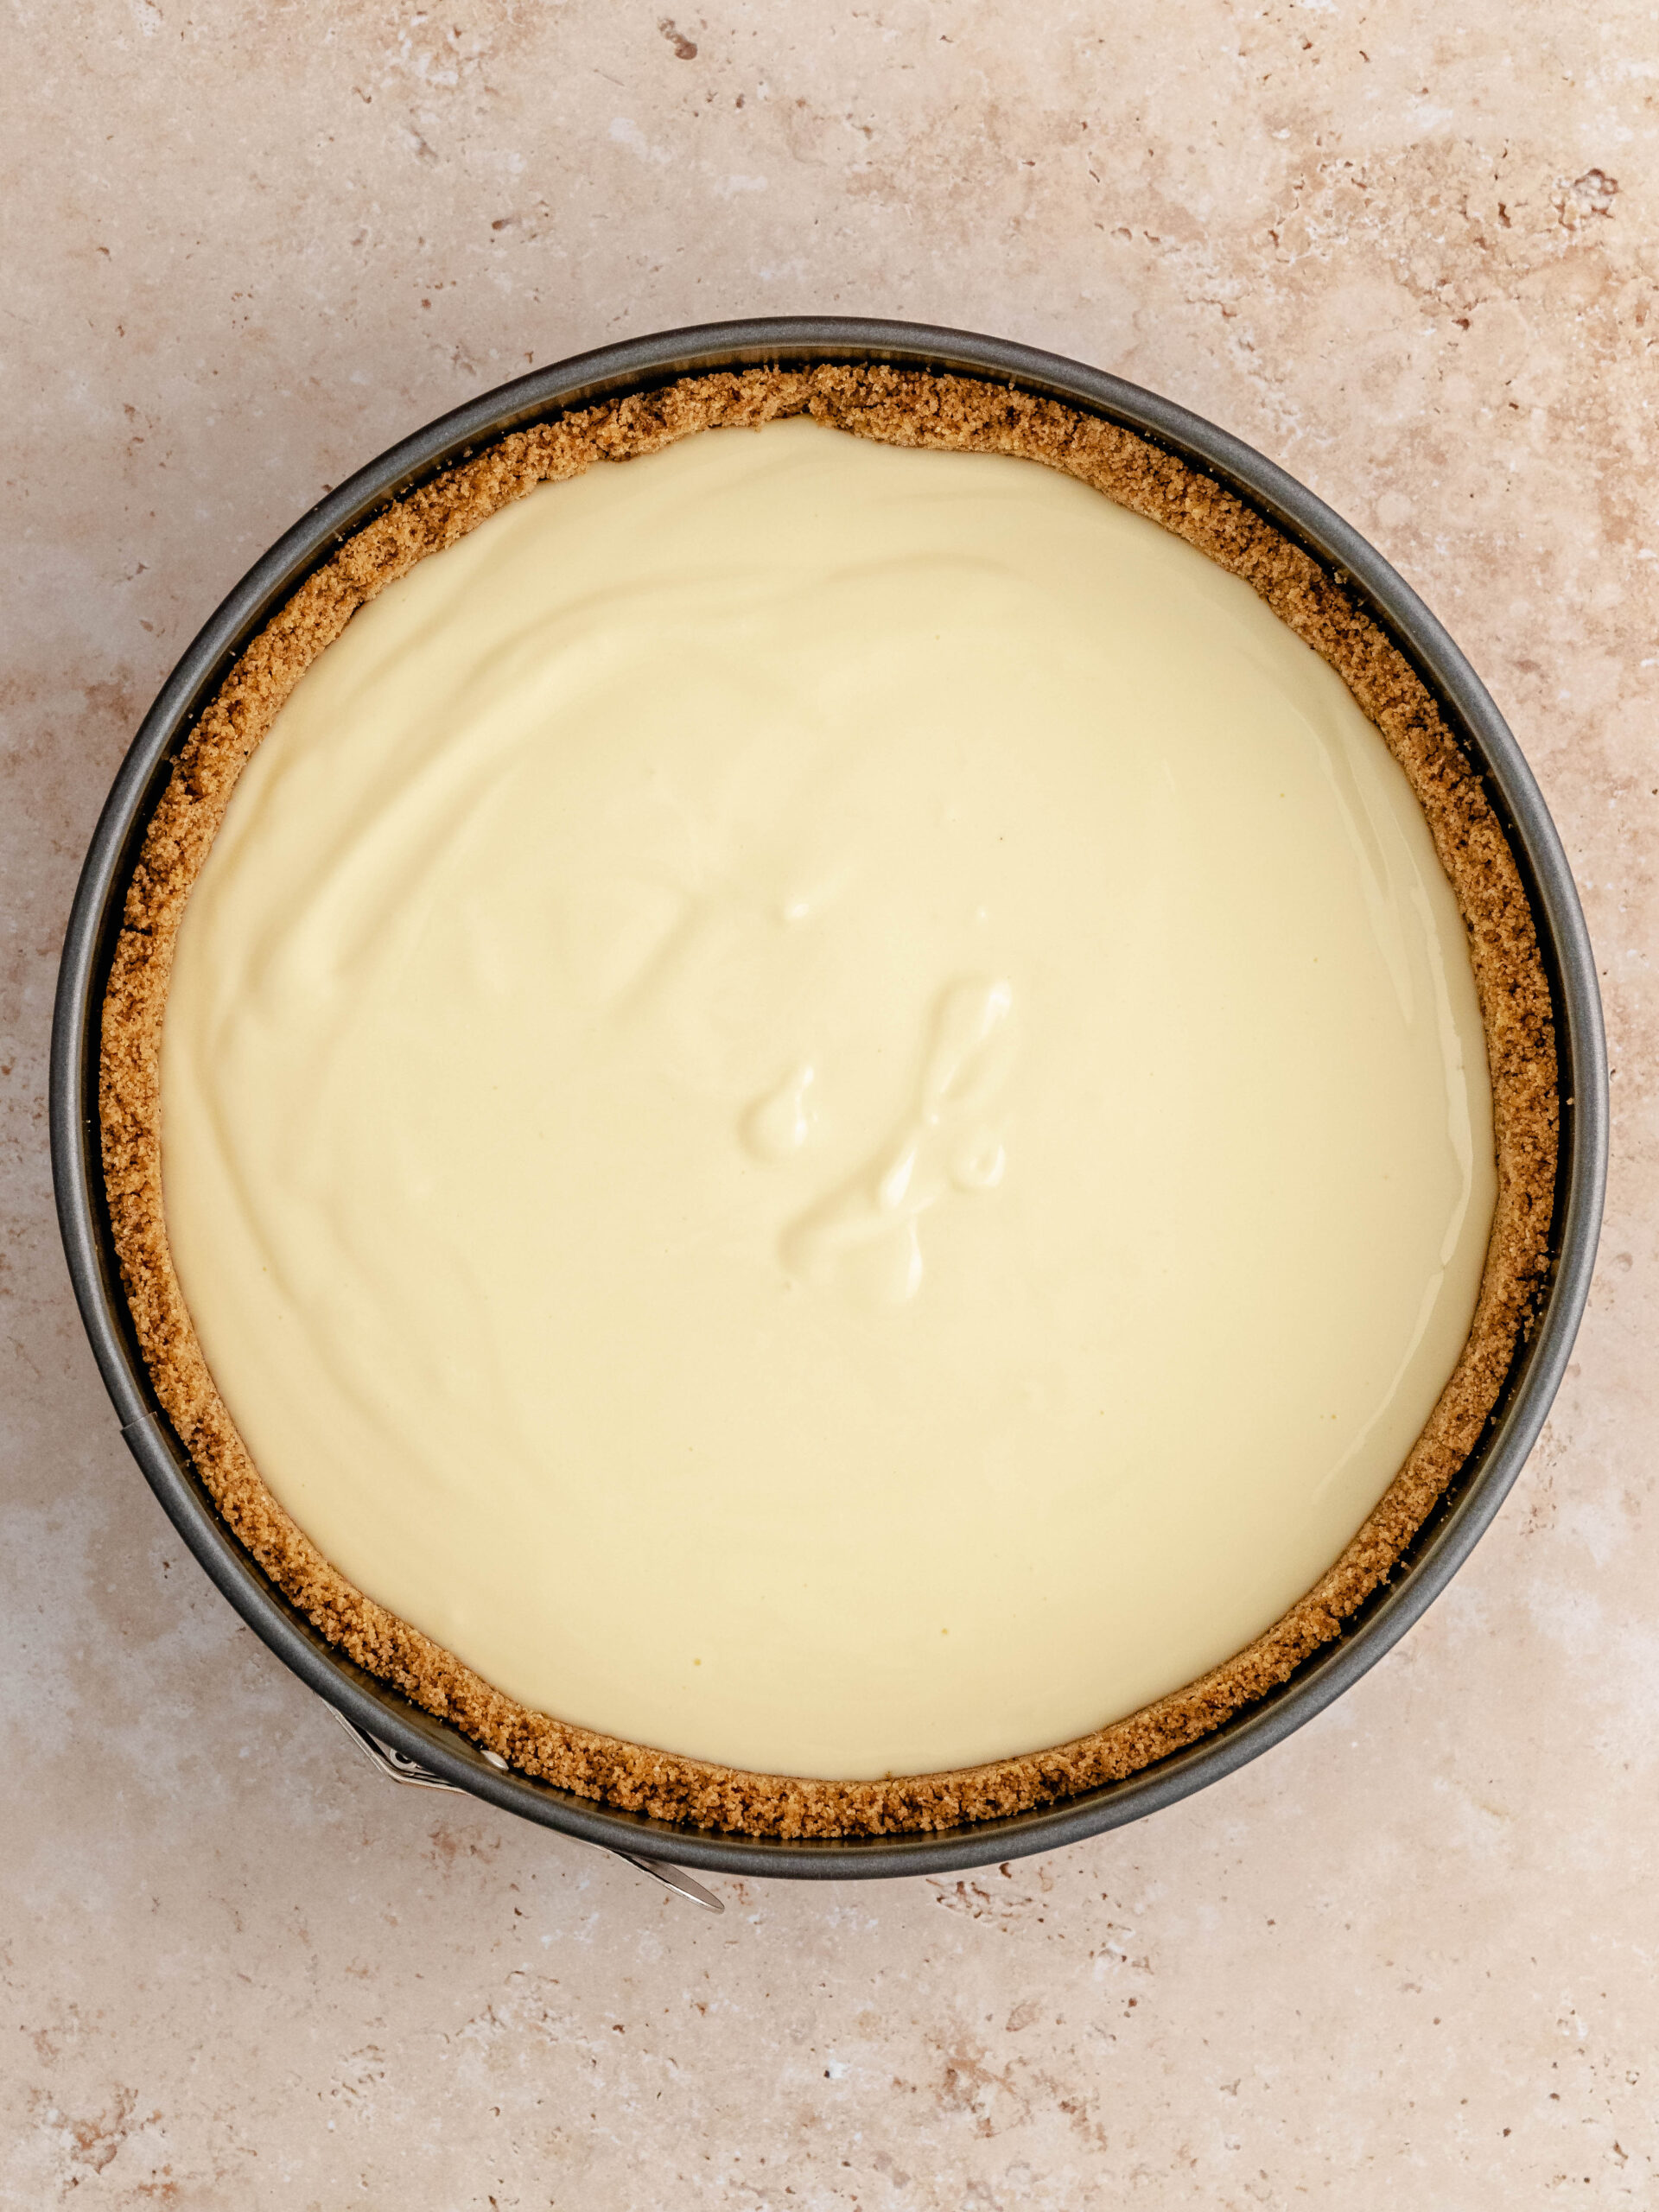 Cheesecake filling poured into the cookie crust.